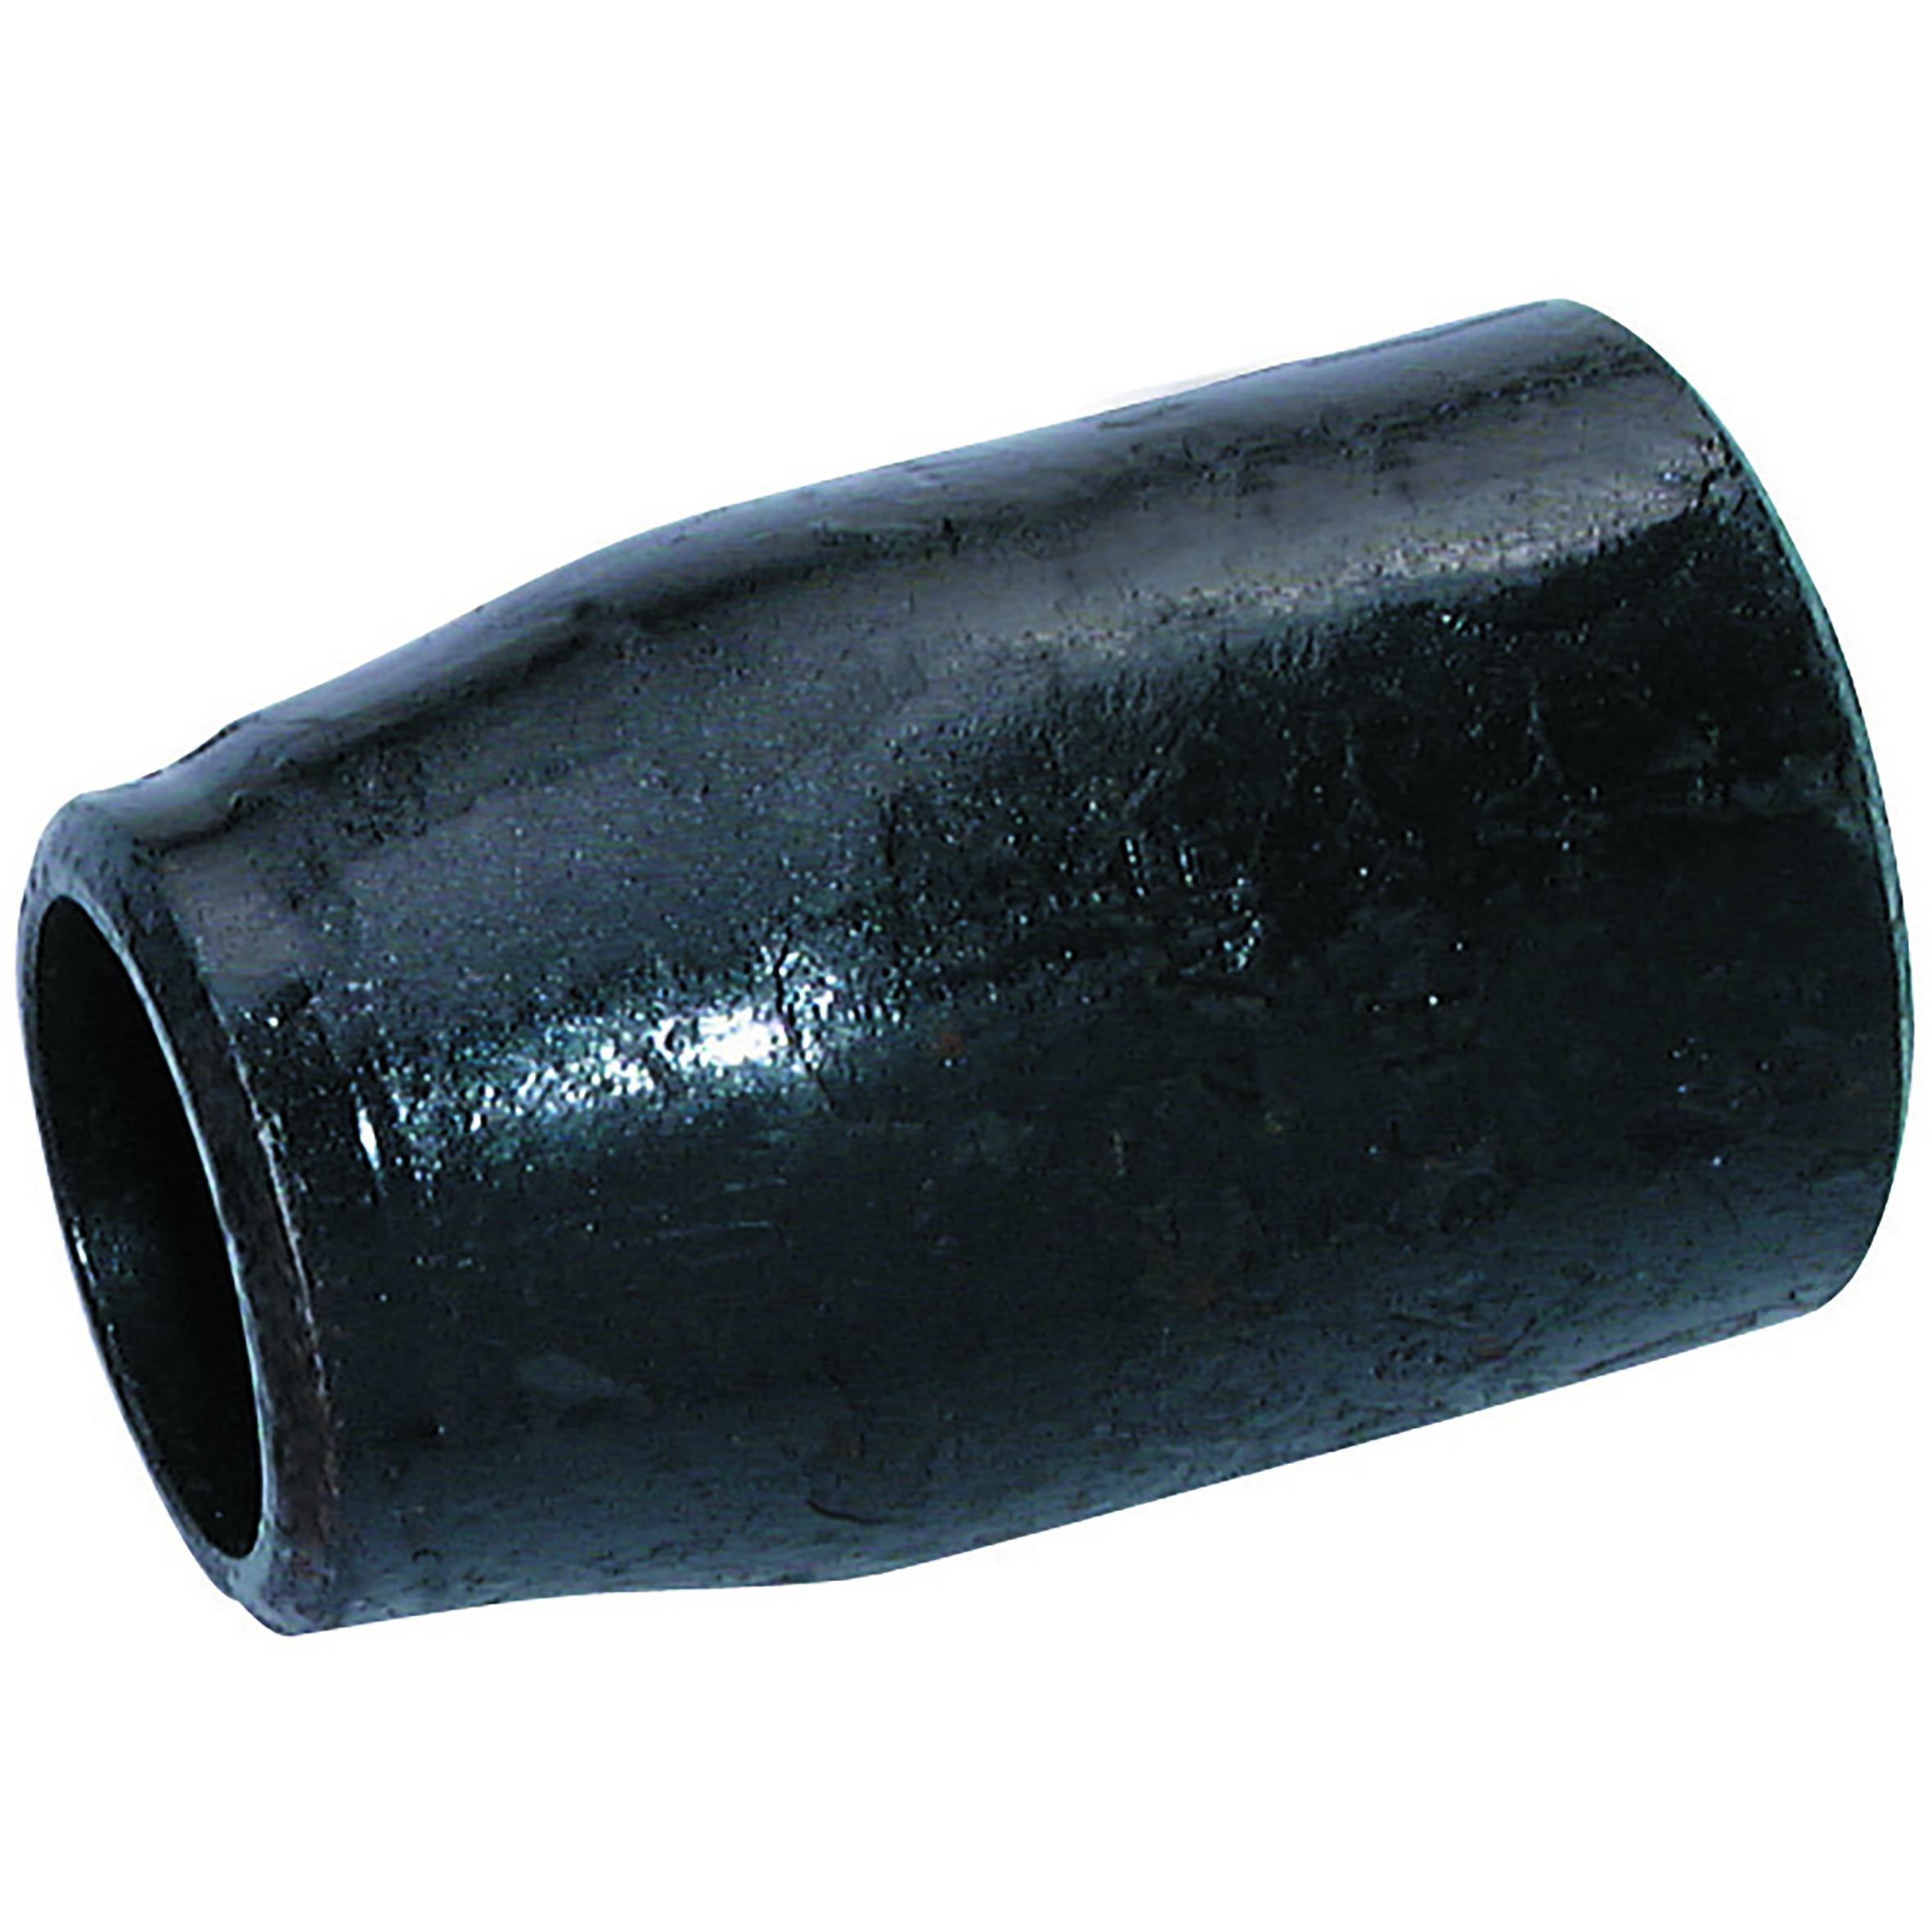 1.1/2"X1/2"  CONCENTRIC REDUCER BUTTWELD